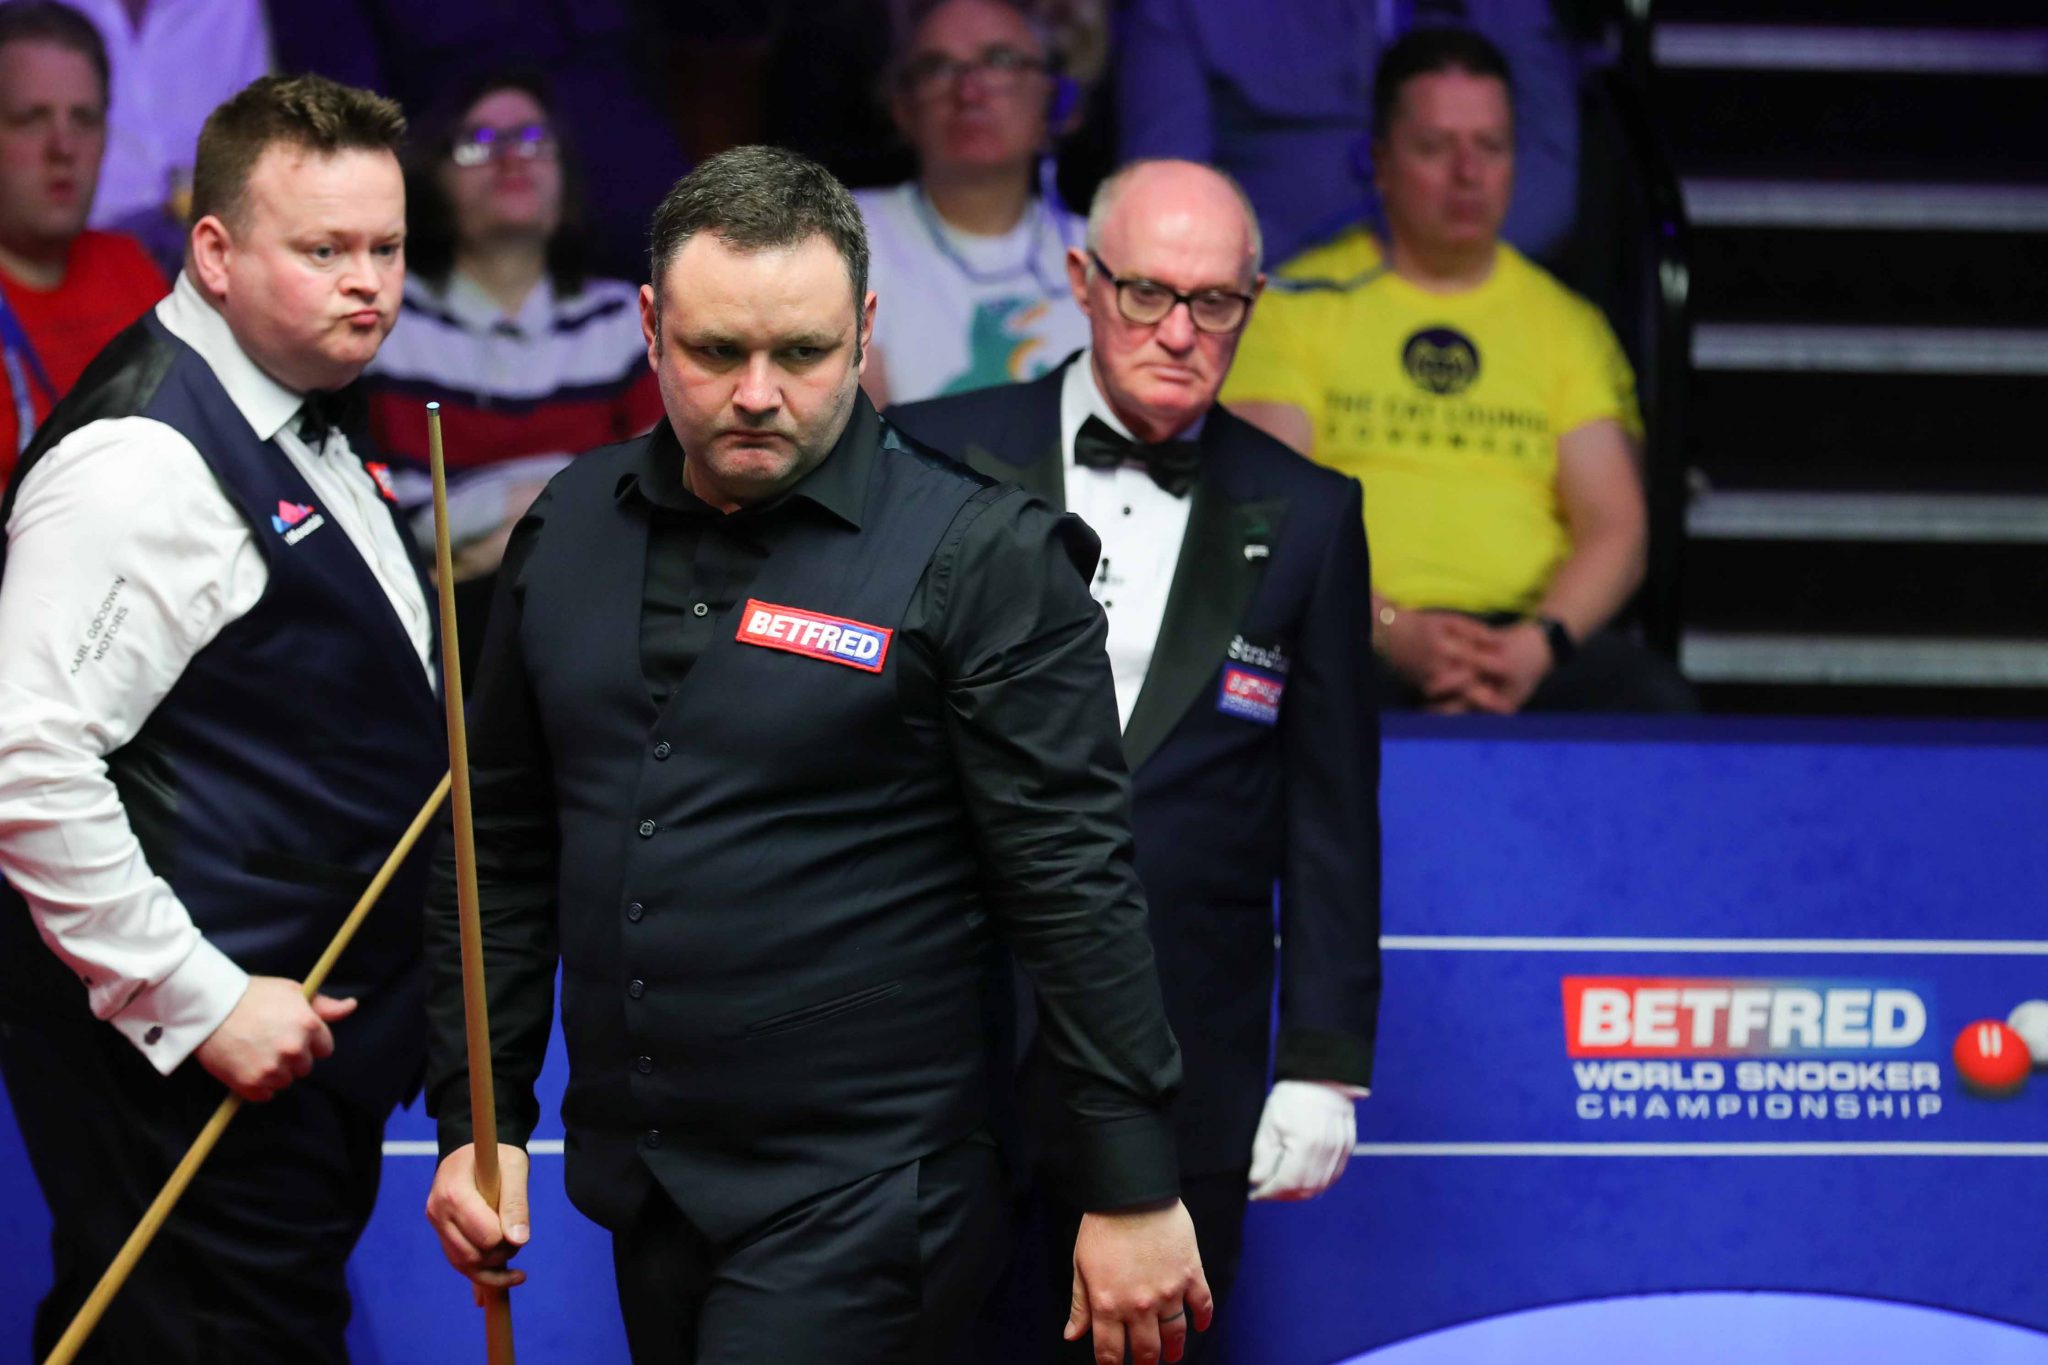 MAGUIRE DOWNS MURPHY IN FIRST CRUCIBLE MEETING